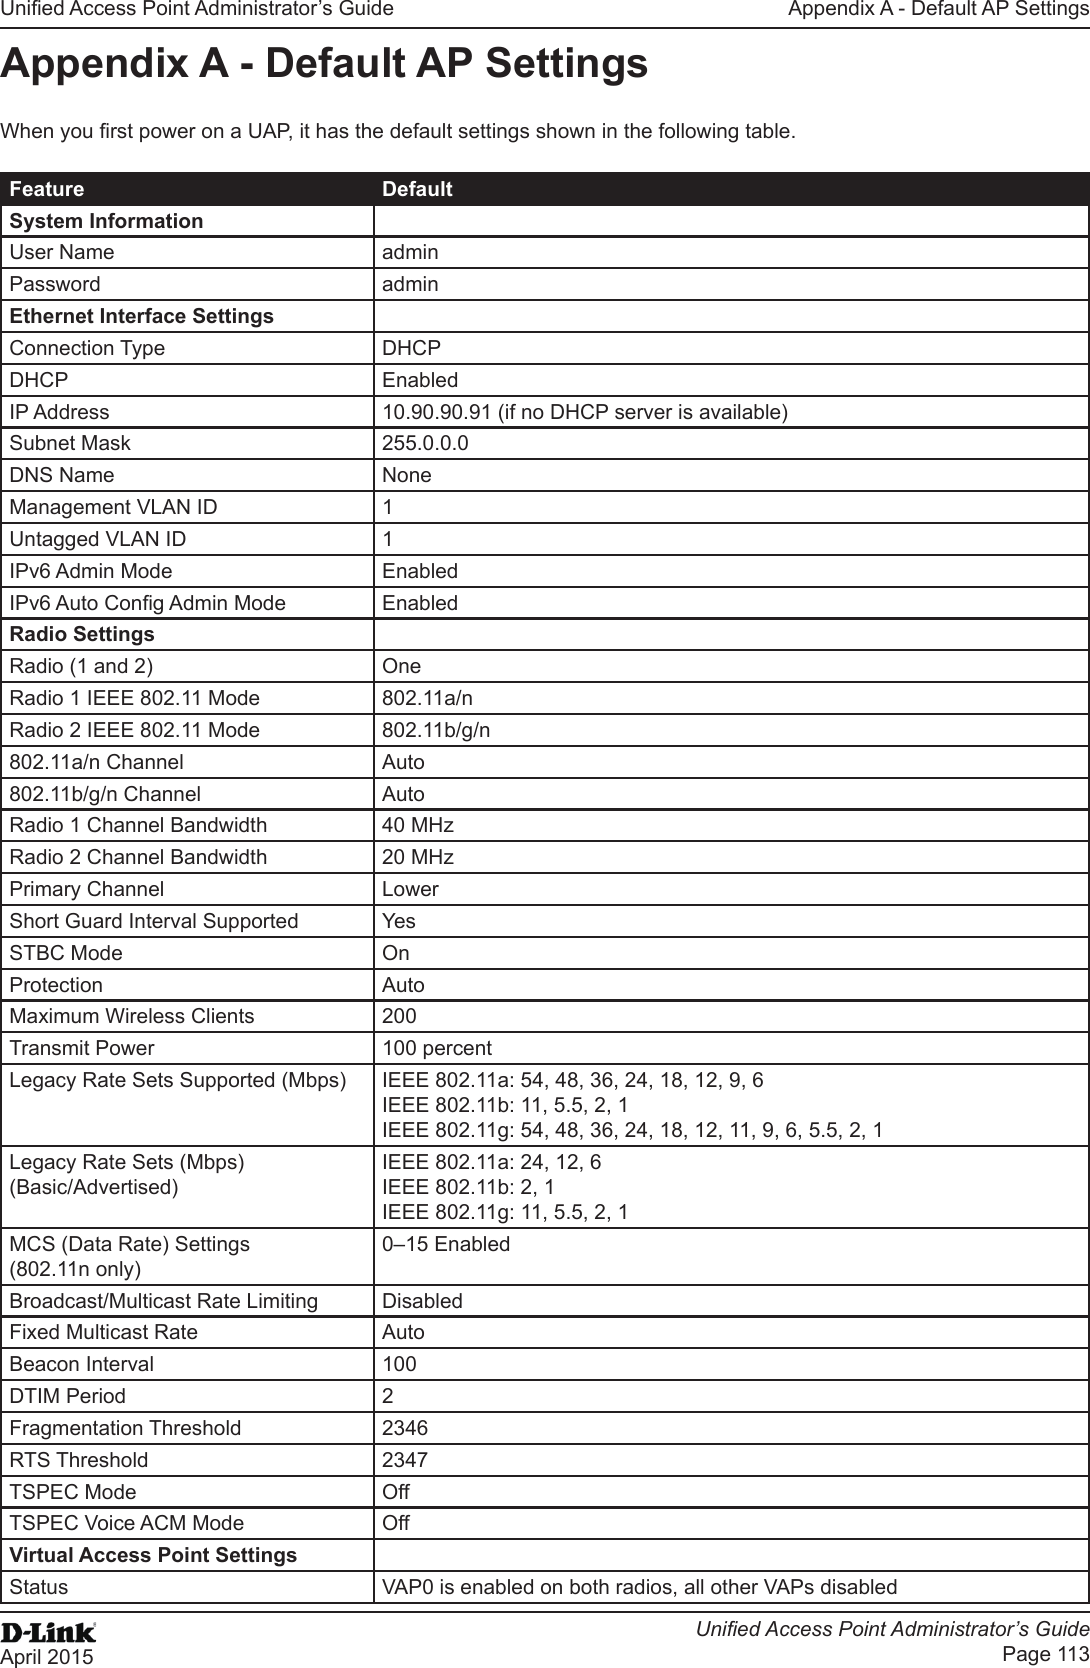 Unied Access Point Administrator’s GuideUnied Access Point Administrator’s GuidePage 113April 2015Appendix A - Default AP SettingsAppendix A - Default AP SettingsWhen you rst power on a UAP, it has the default settings shown in the following table.Feature DefaultSystem InformationUser Name adminPassword adminEthernet Interface SettingsConnection Type DHCPDHCP EnabledIP Address 10.90.90.91 (if no DHCP server is available)Subnet Mask 255.0.0.0DNS Name NoneManagement VLAN ID 1Untagged VLAN ID 1IPv6 Admin Mode EnabledIPv6 Auto Cong Admin Mode EnabledRadio SettingsRadio (1 and 2) OneRadio 1 IEEE 802.11 Mode 802.11a/nRadio 2 IEEE 802.11 Mode 802.11b/g/n802.11a/n Channel Auto802.11b/g/n Channel AutoRadio 1 Channel Bandwidth 40 MHzRadio 2 Channel Bandwidth 20 MHzPrimary Channel LowerShort Guard Interval Supported YesSTBC Mode OnProtection AutoMaximum Wireless Clients 200Transmit Power 100 percentLegacy Rate Sets Supported (Mbps) IEEE 802.11a: 54, 48, 36, 24, 18, 12, 9, 6 IEEE 802.11b: 11, 5.5, 2, 1IEEE 802.11g: 54, 48, 36, 24, 18, 12, 11, 9, 6, 5.5, 2, 1Legacy Rate Sets (Mbps)(Basic/Advertised)IEEE 802.11a: 24, 12, 6IEEE 802.11b: 2, 1IEEE 802.11g: 11, 5.5, 2, 1MCS (Data Rate) Settings (802.11n only)0–15 EnabledBroadcast/Multicast Rate Limiting DisabledFixed Multicast Rate AutoBeacon Interval 100DTIM Period 2Fragmentation Threshold 2346RTS Threshold 2347TSPEC Mode OffTSPEC Voice ACM Mode OffVirtual Access Point SettingsStatus VAP0 is enabled on both radios, all other VAPs disabled